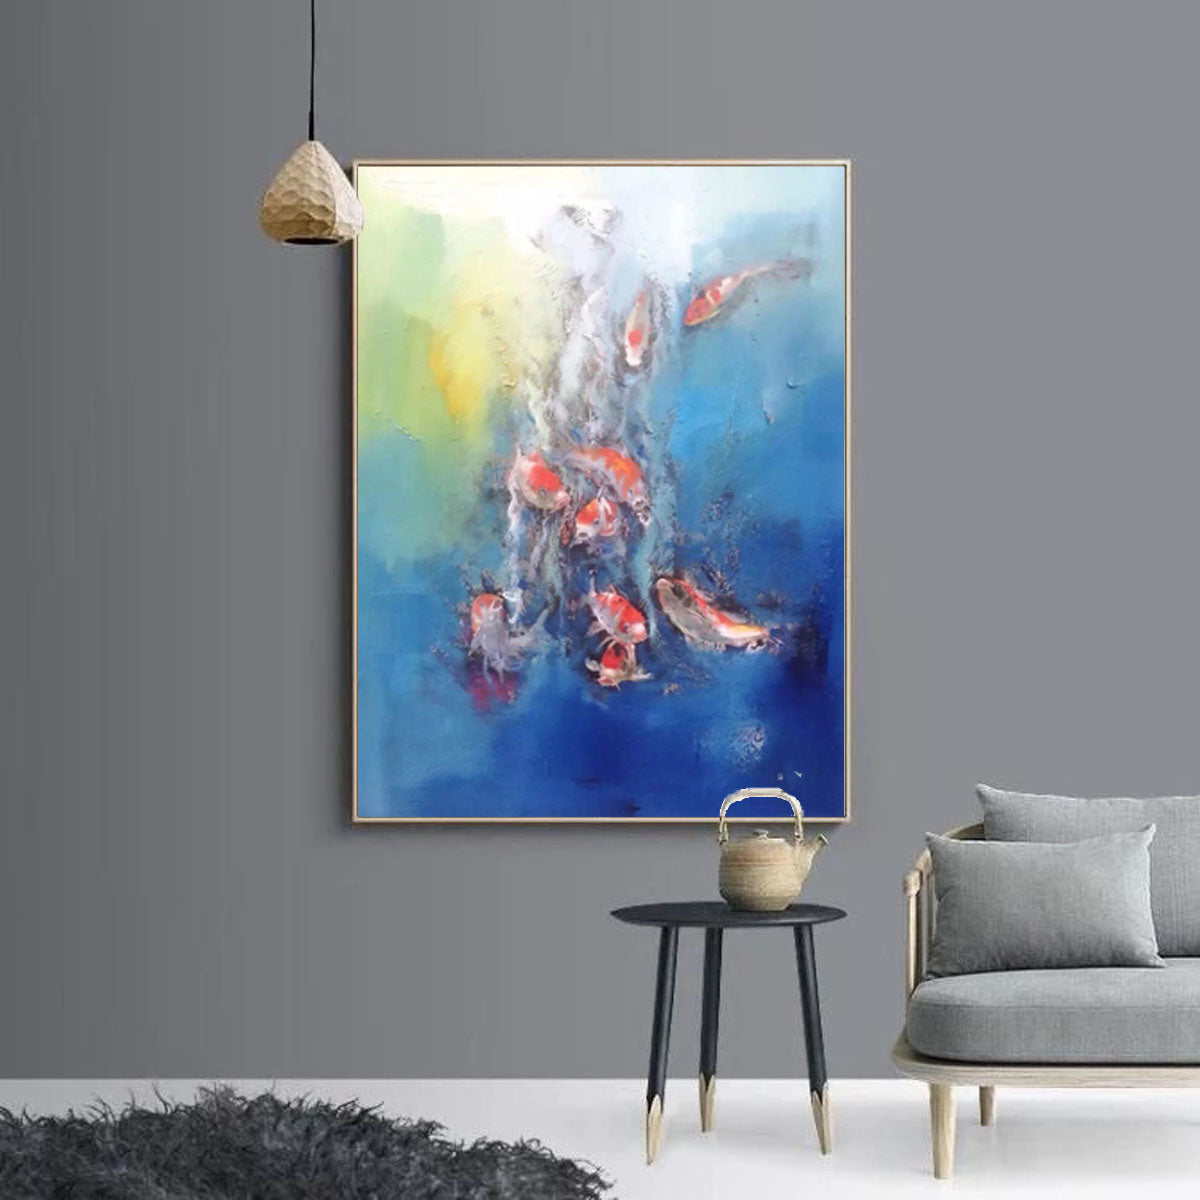 Extra large canvas wall art, abstract artist contemporary painting L11 ...